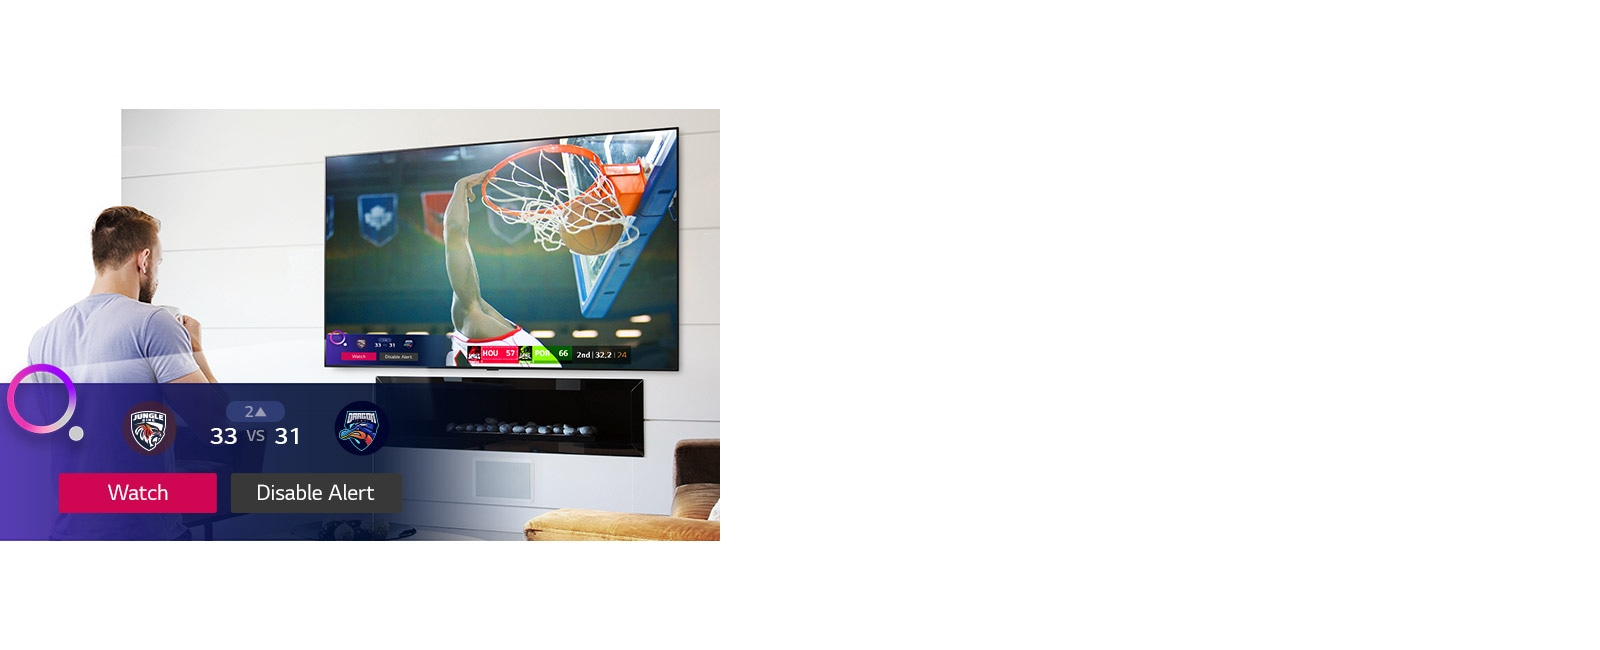 TV screen showing a scene from a basketball game with a Sports Alert